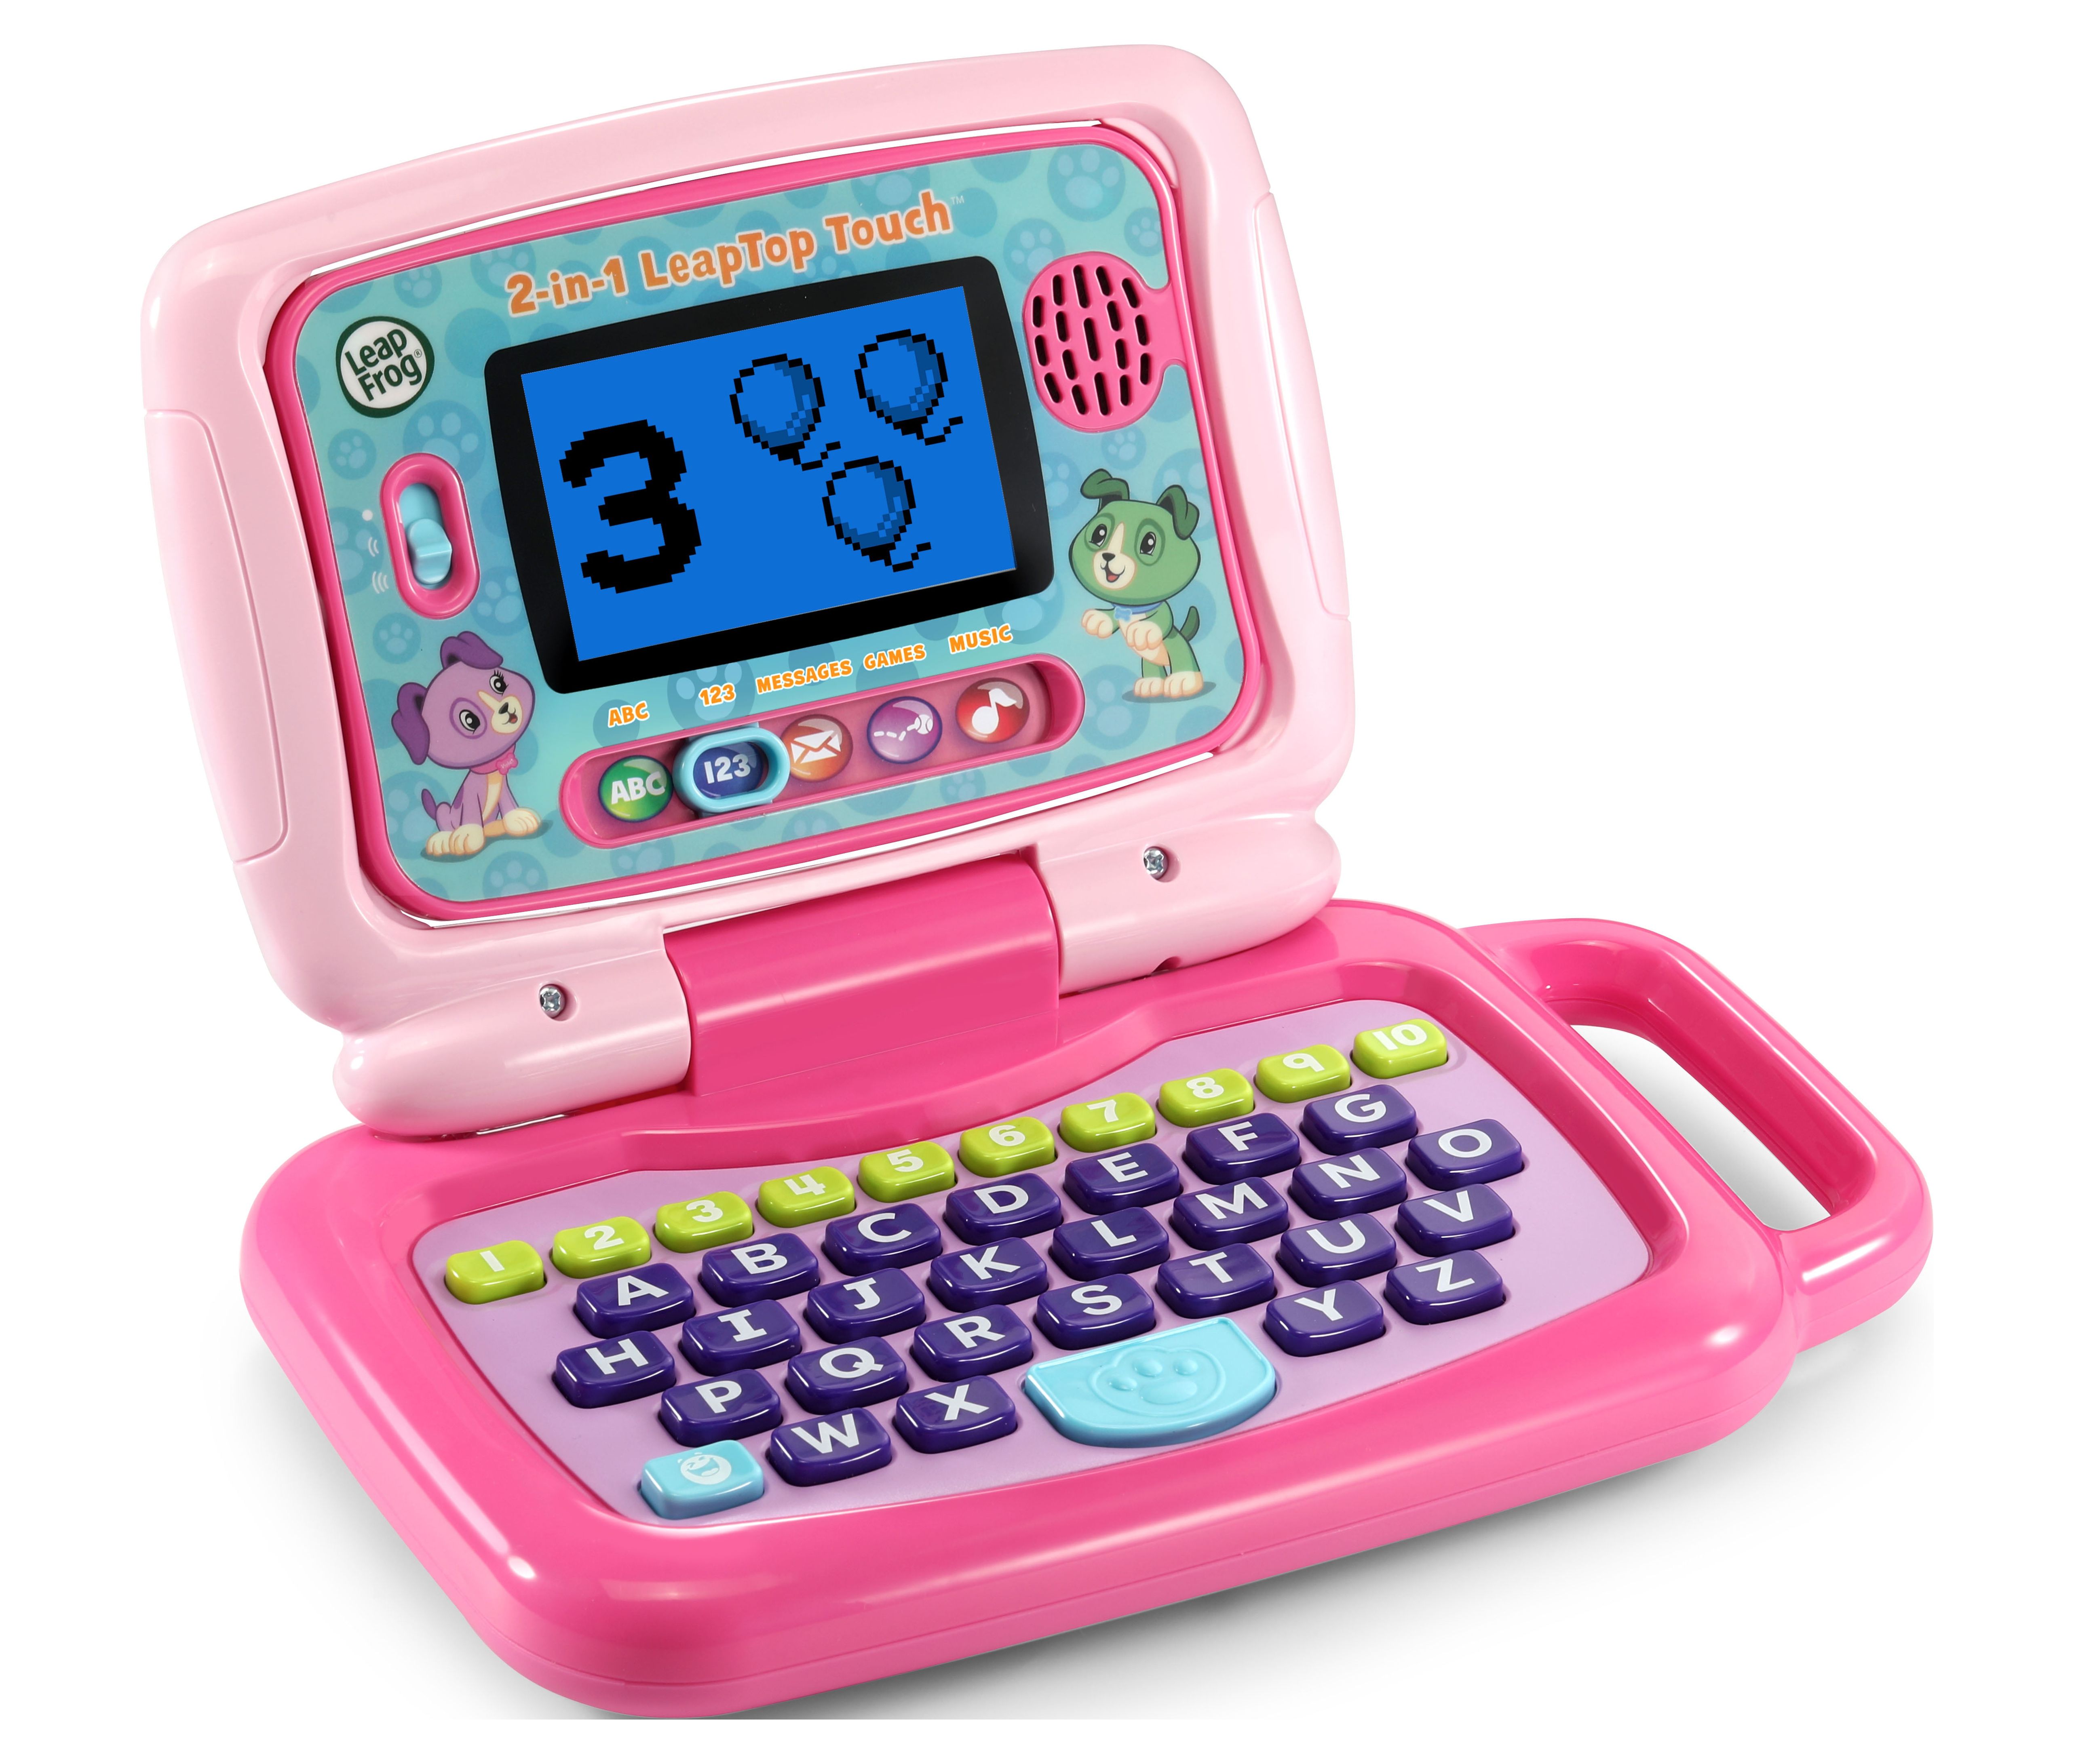 LeapFrog 2-in-1 LeapTop Touch for Toddlers, Electronic Learning System, Teaches Letters, Numbers - image 5 of 12